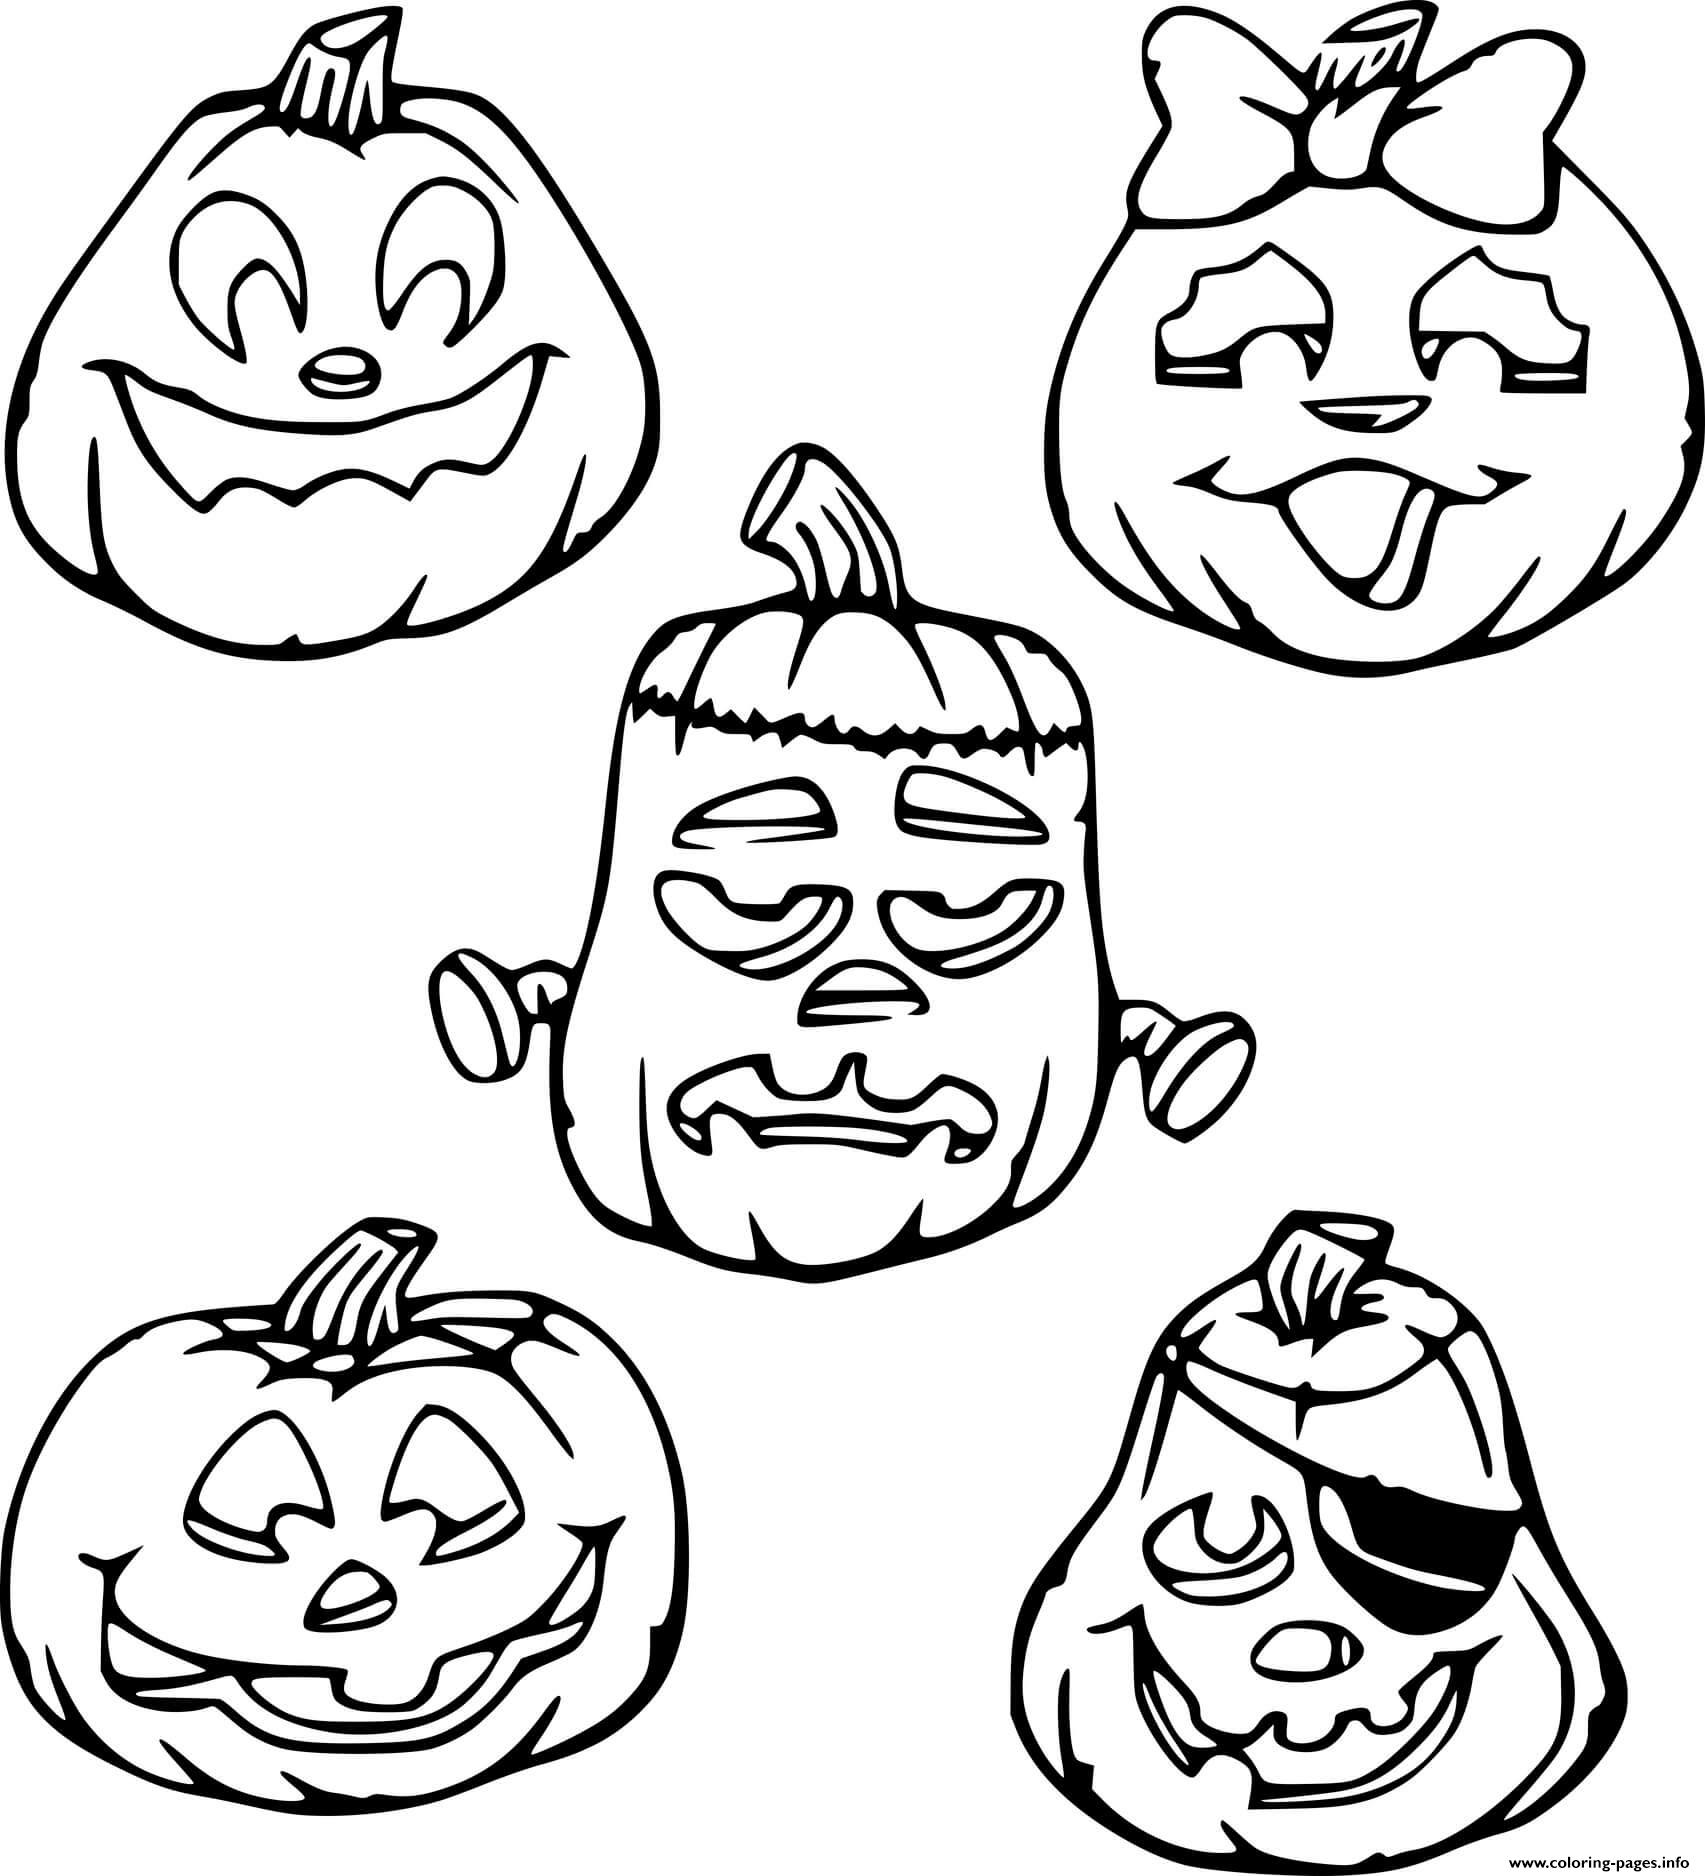 Five Different Jack O Lantern Characters coloring